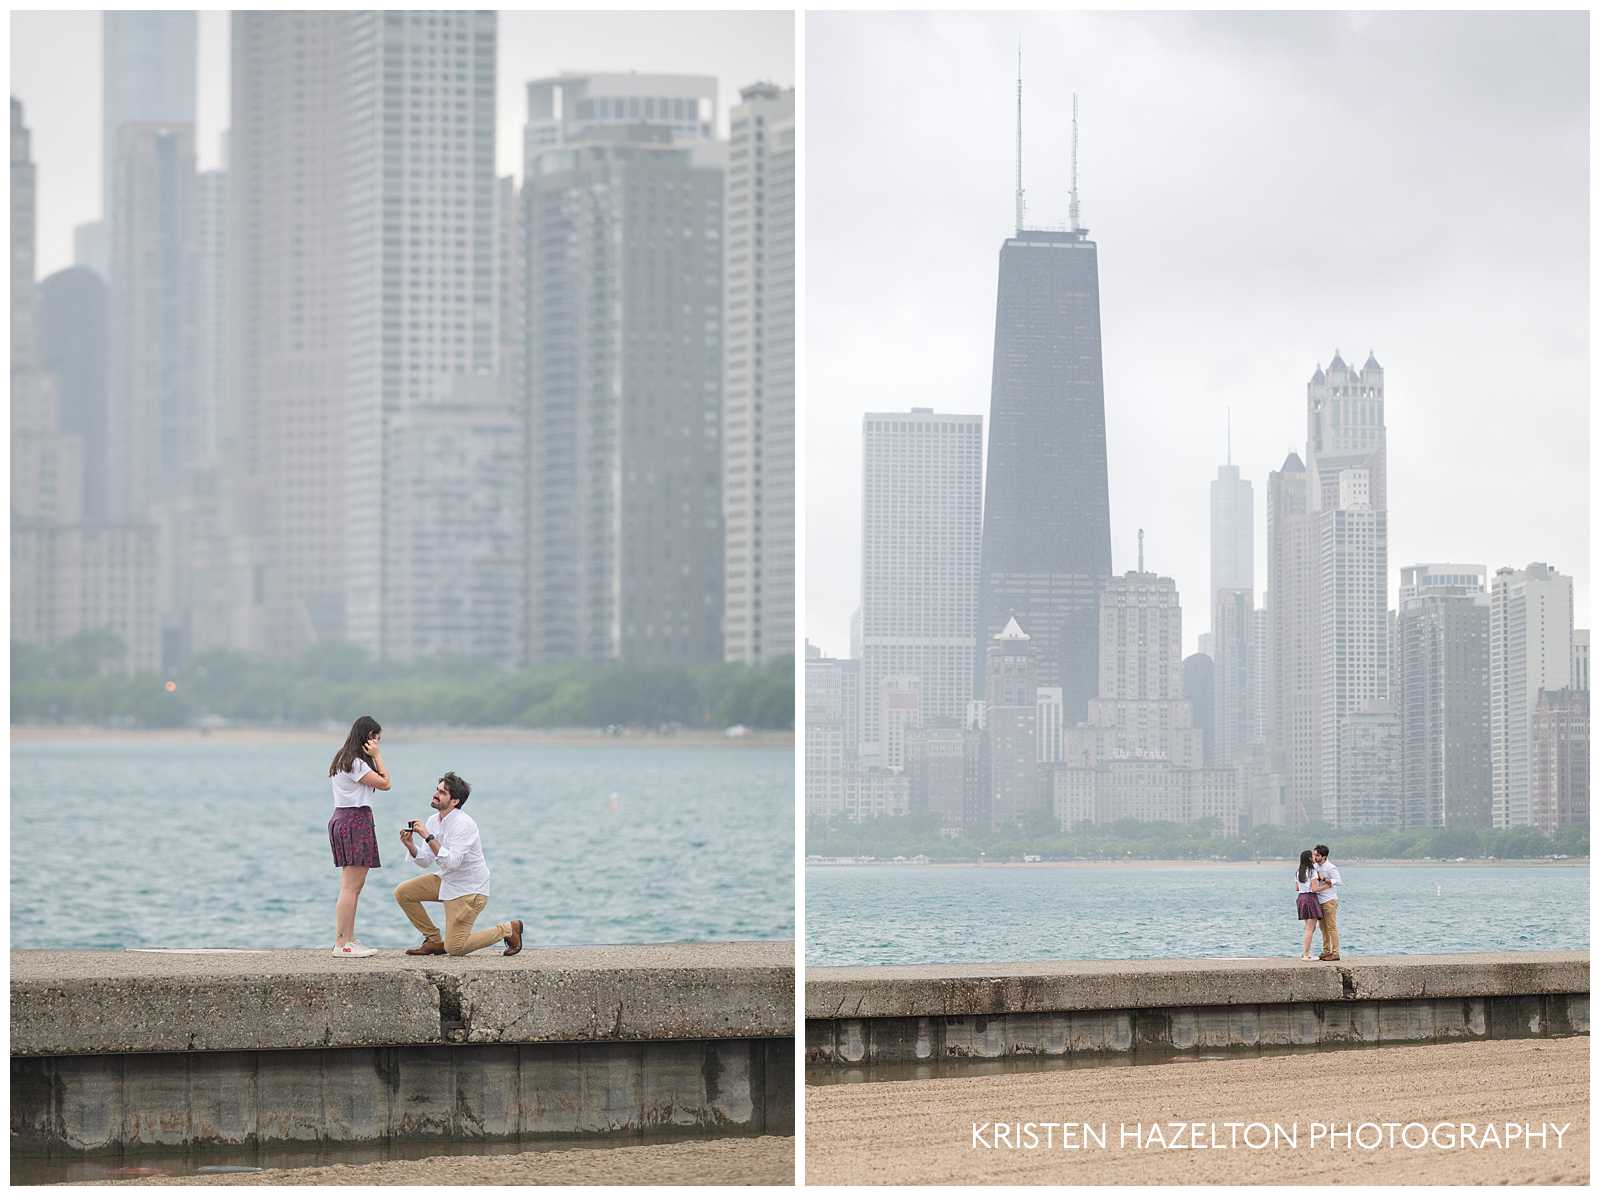 She said yes, during a surprise proposal at North Avenue Beach